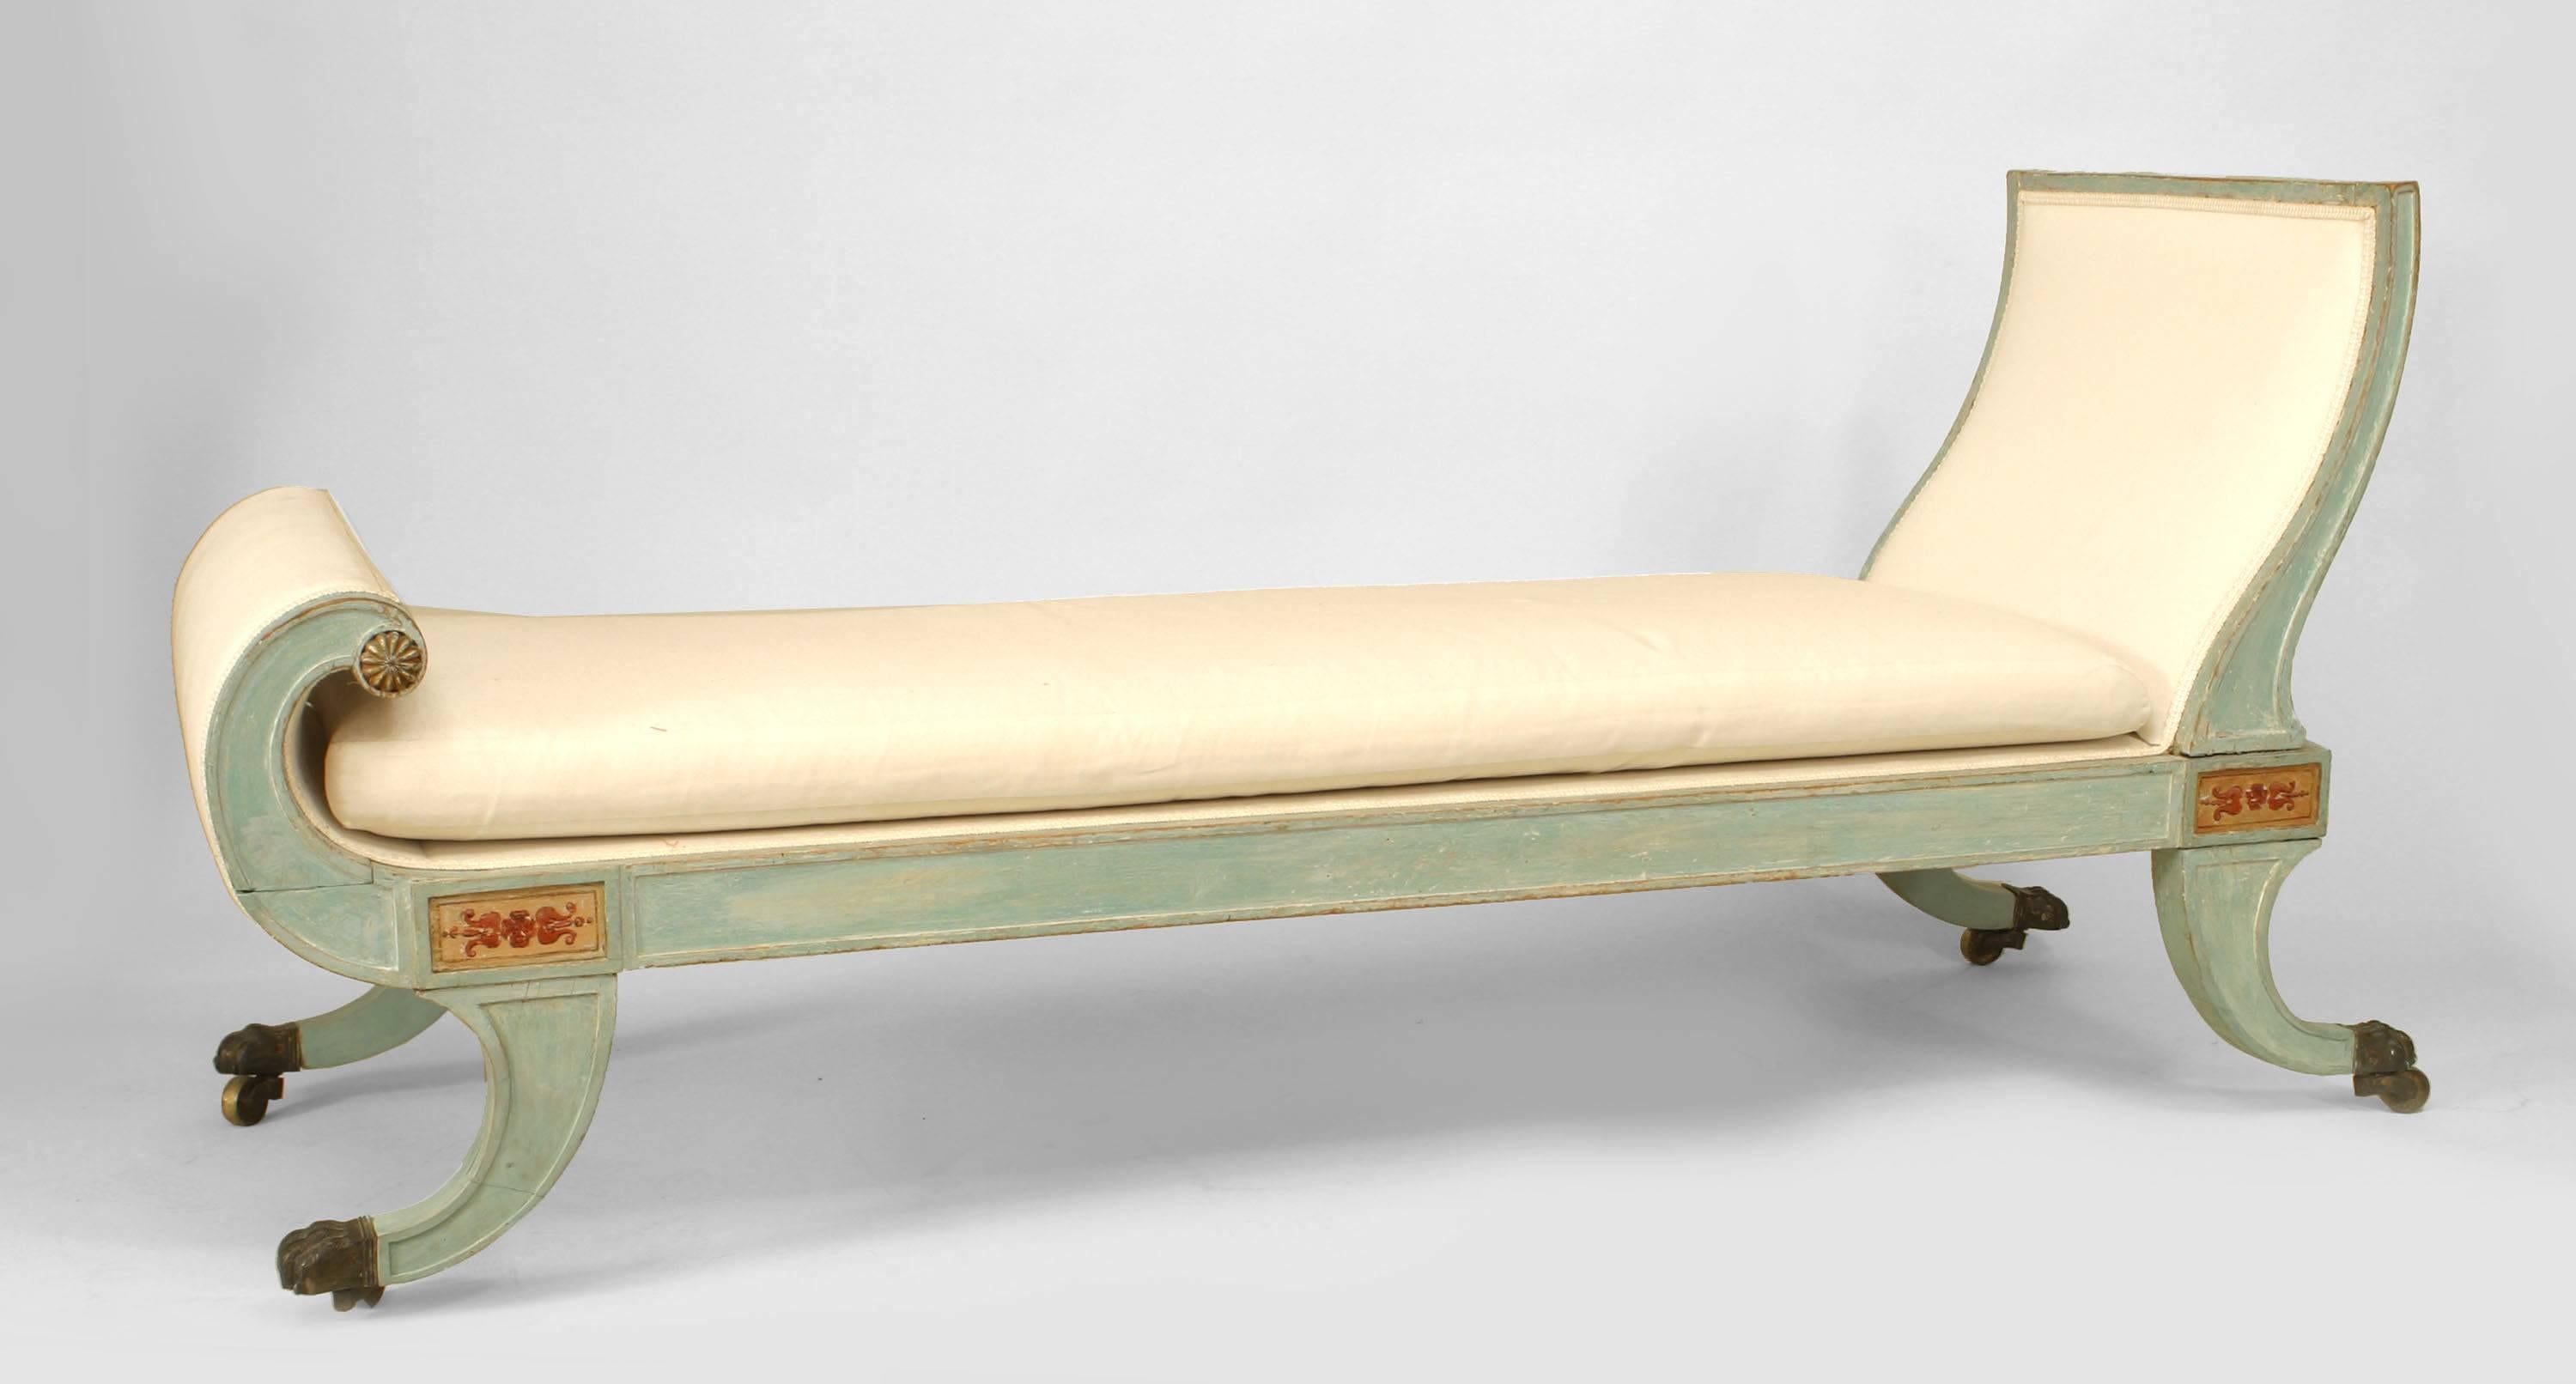 Italian Neo-classic (Possibly Swedish-18th Century) light blue painted and decorated r√©camier with roll design front and sleigh form back.
